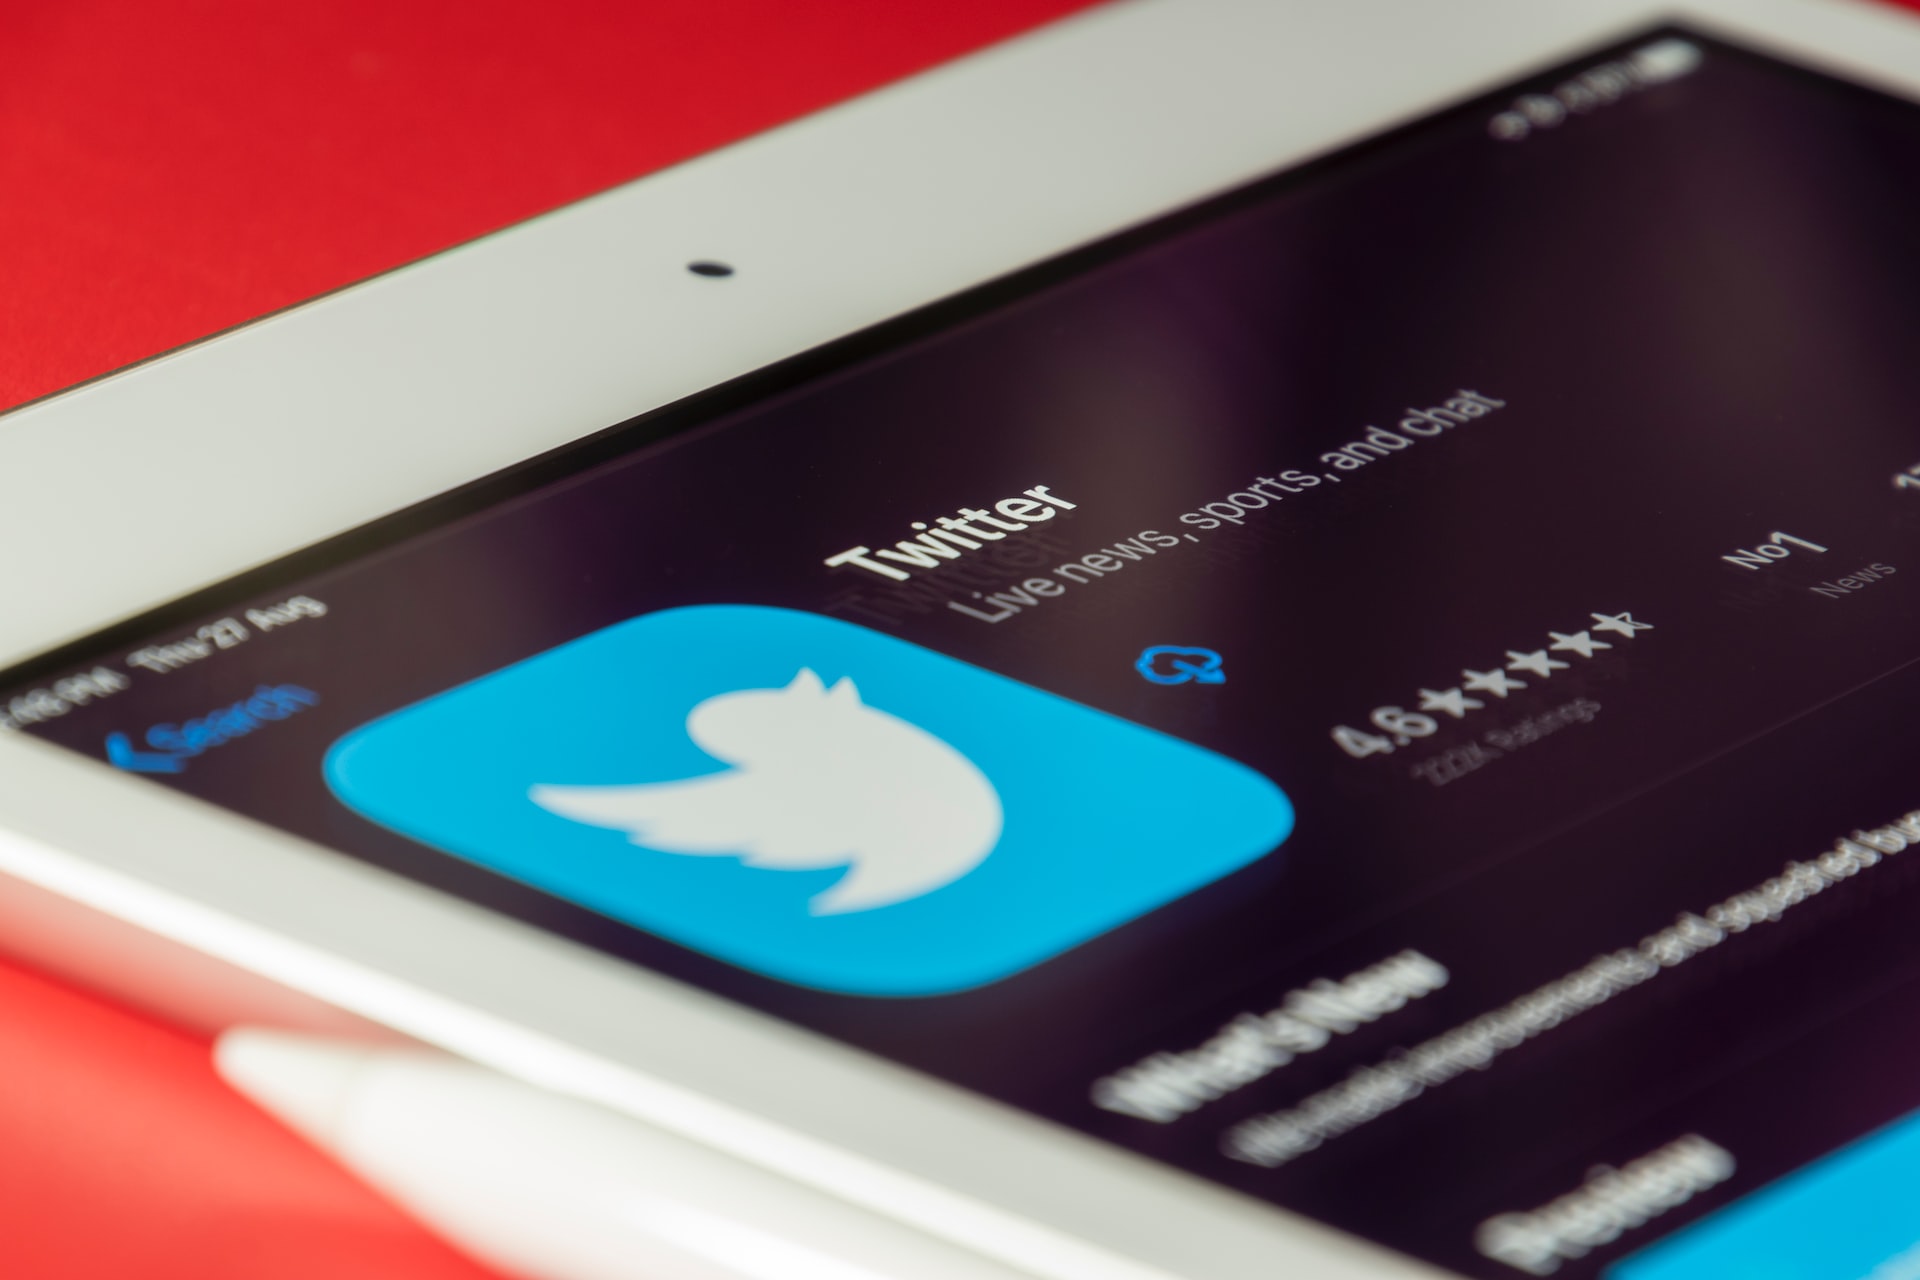 Geek insider, geekinsider, geekinsider. Com,, twitter finds itself with more issues, business